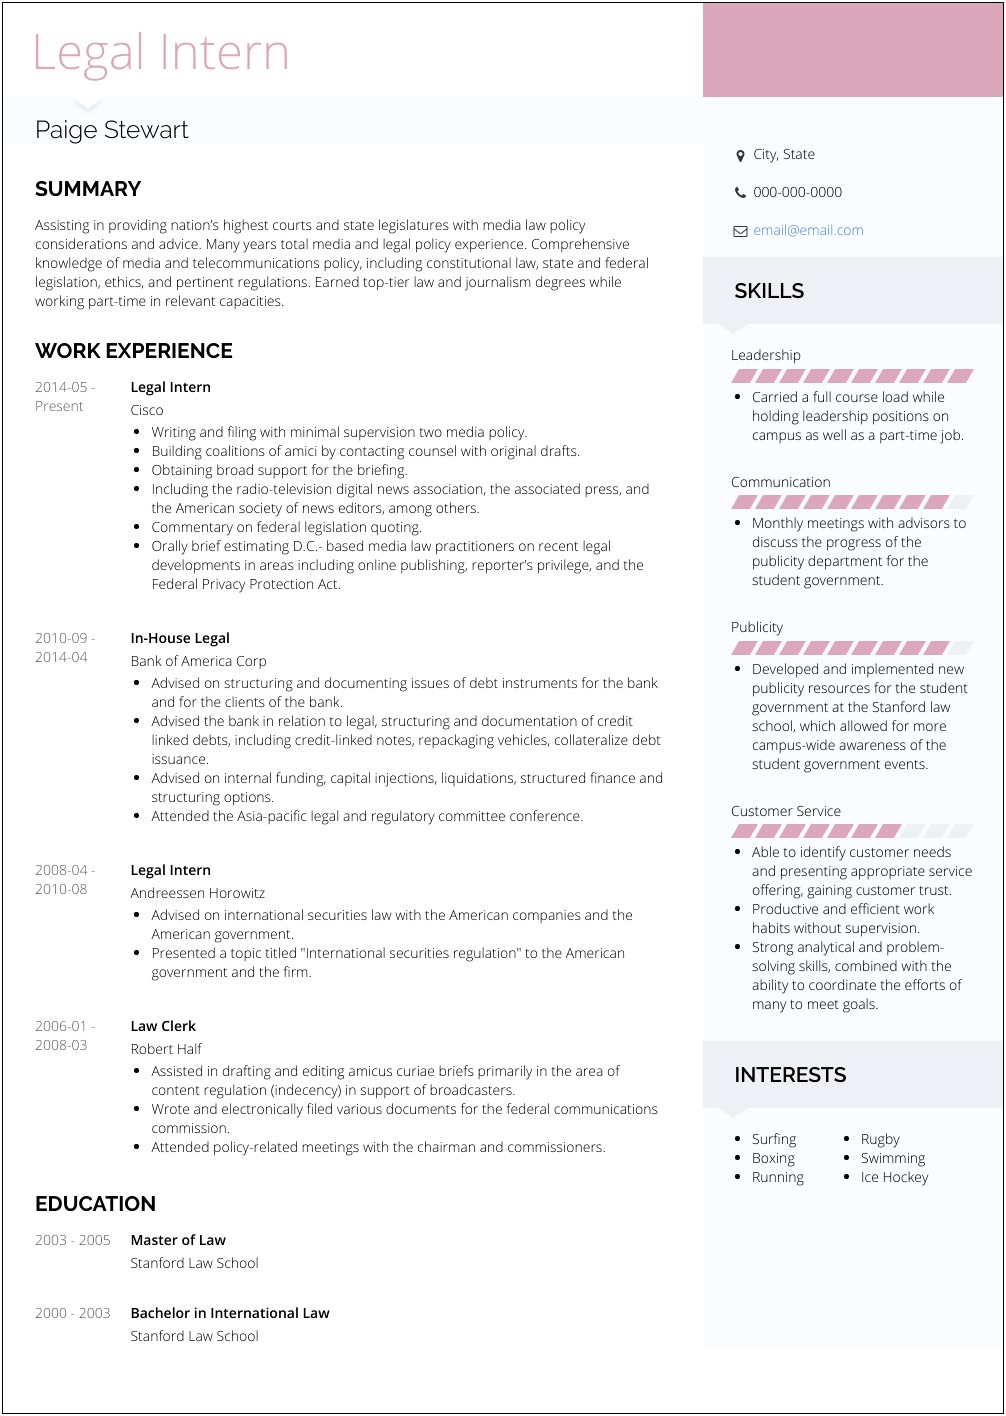 Resume Objective For Internship In Accounting